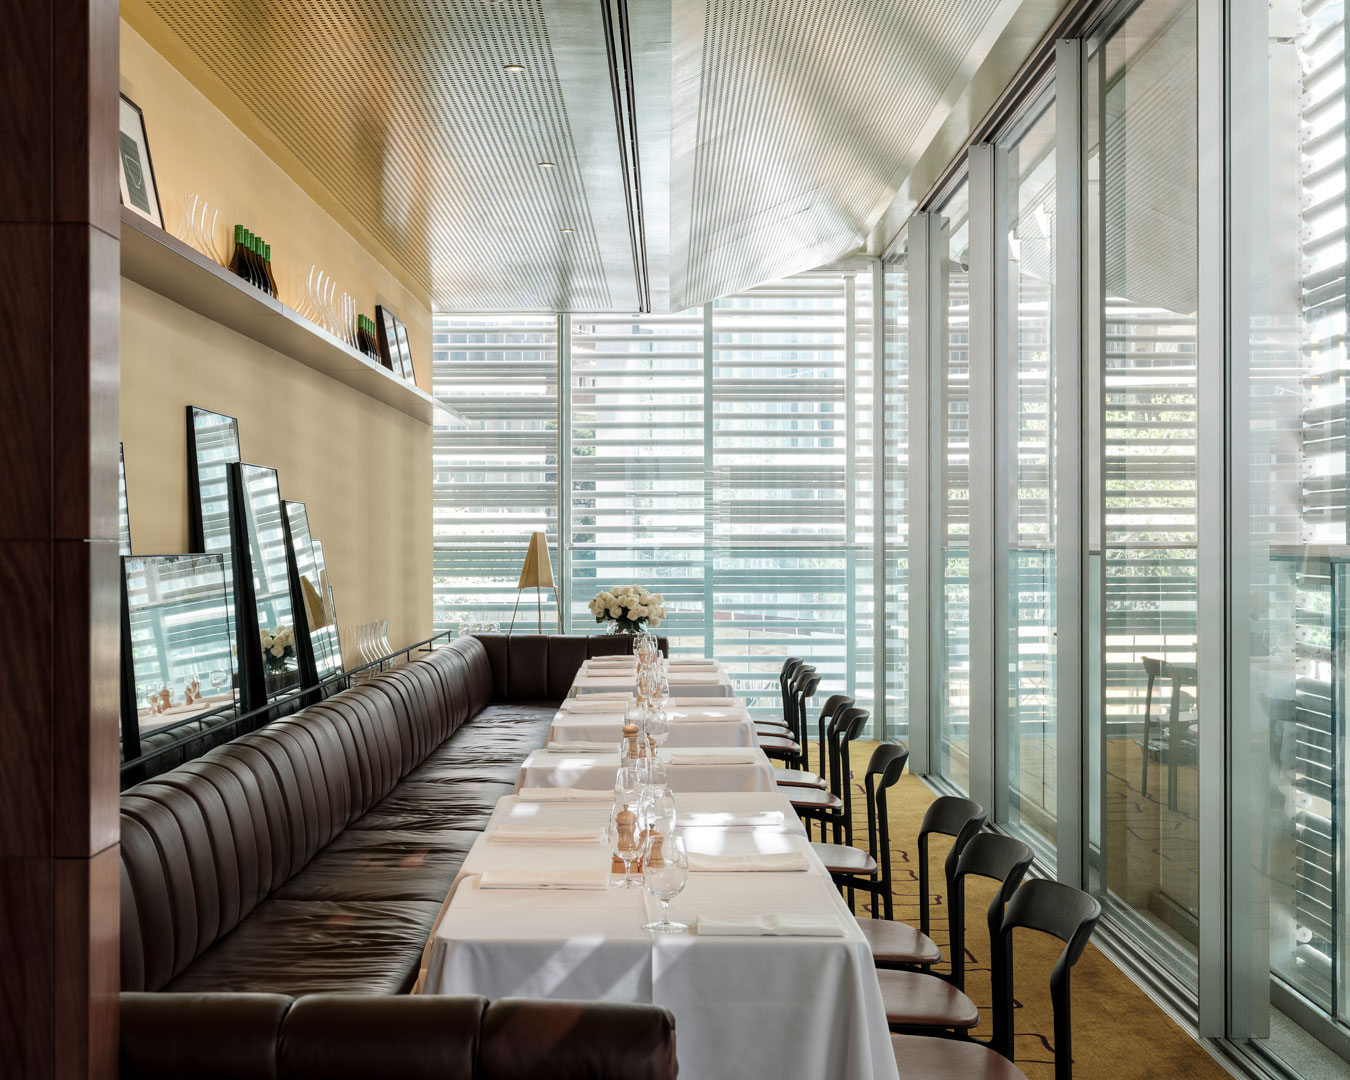 The private dining room at Bistro George - a new restaurant in Sydney